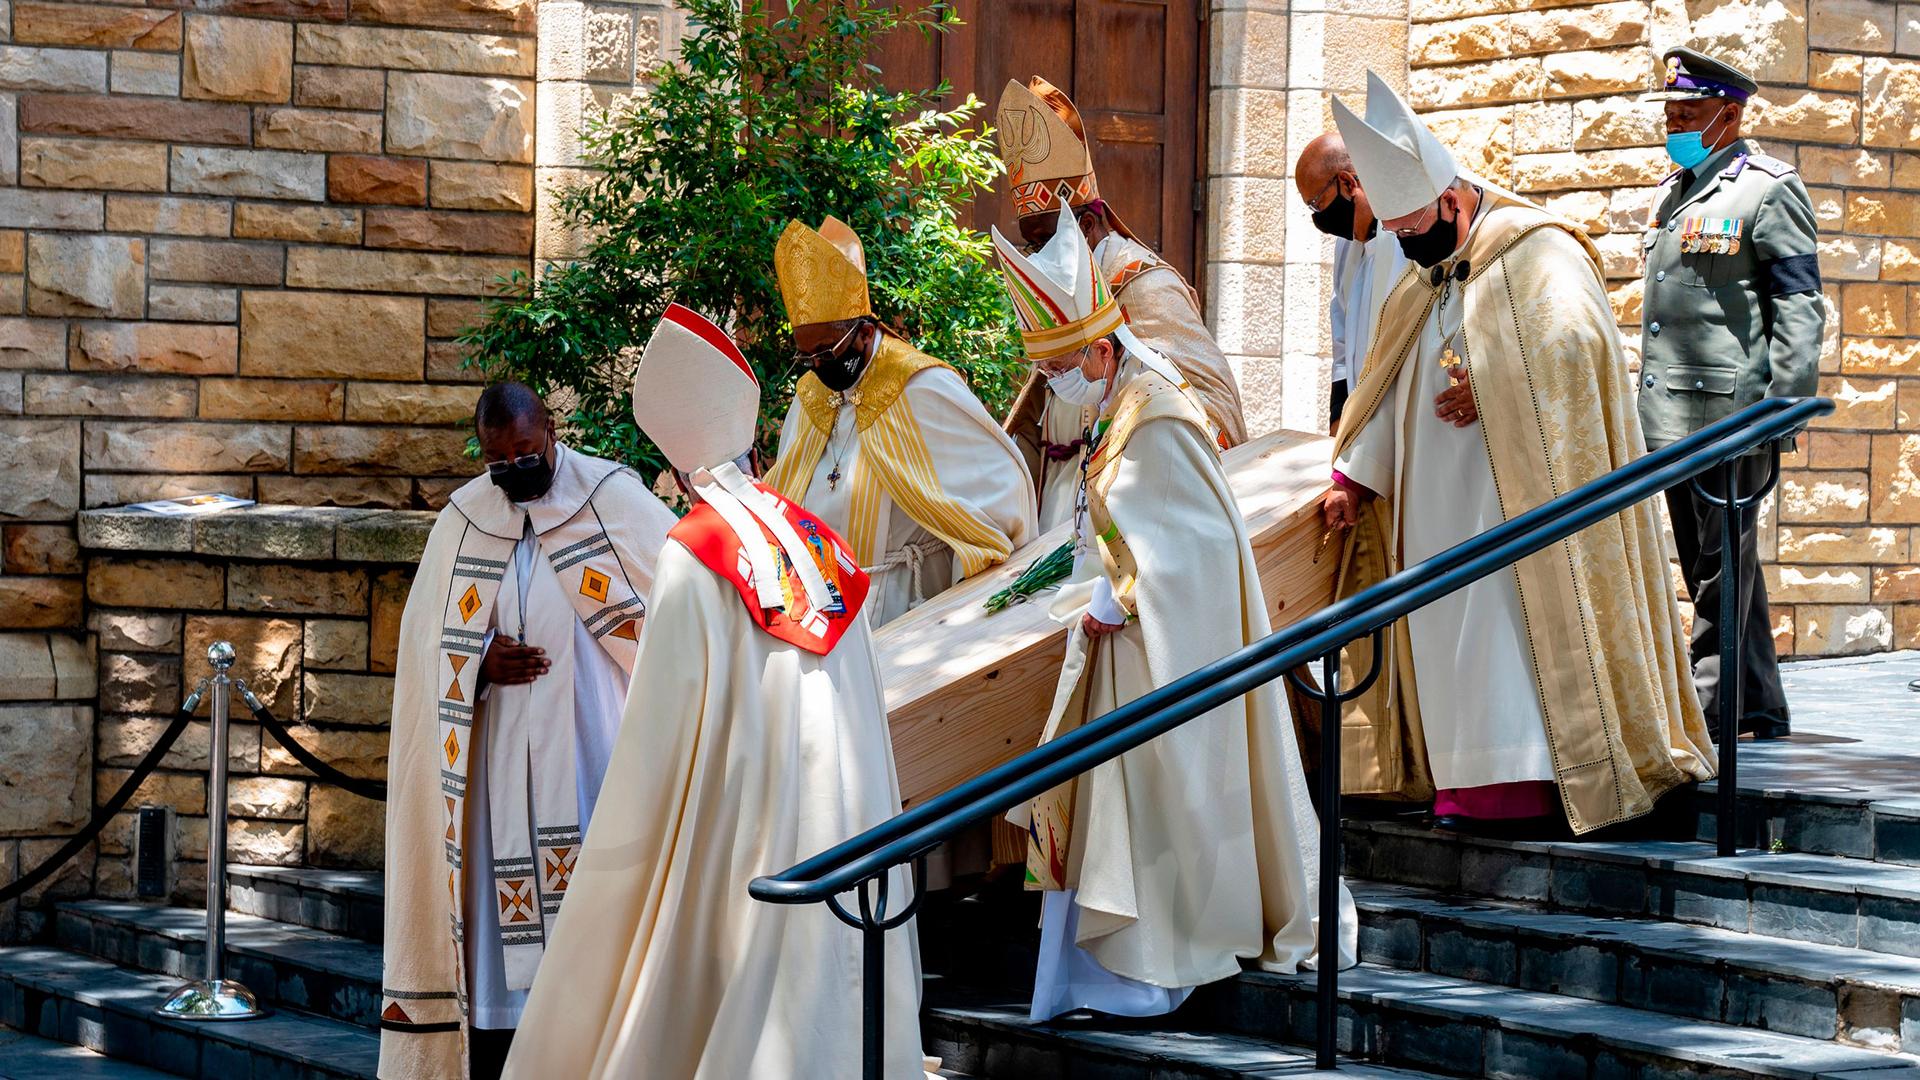 Clerics carry the coffin after the funeral for Anglican Archbishop Emeritus Desmond Tutu at the St George's Cathedral in Cape Town, South Africa, Saturday, Jan 1, 2022.